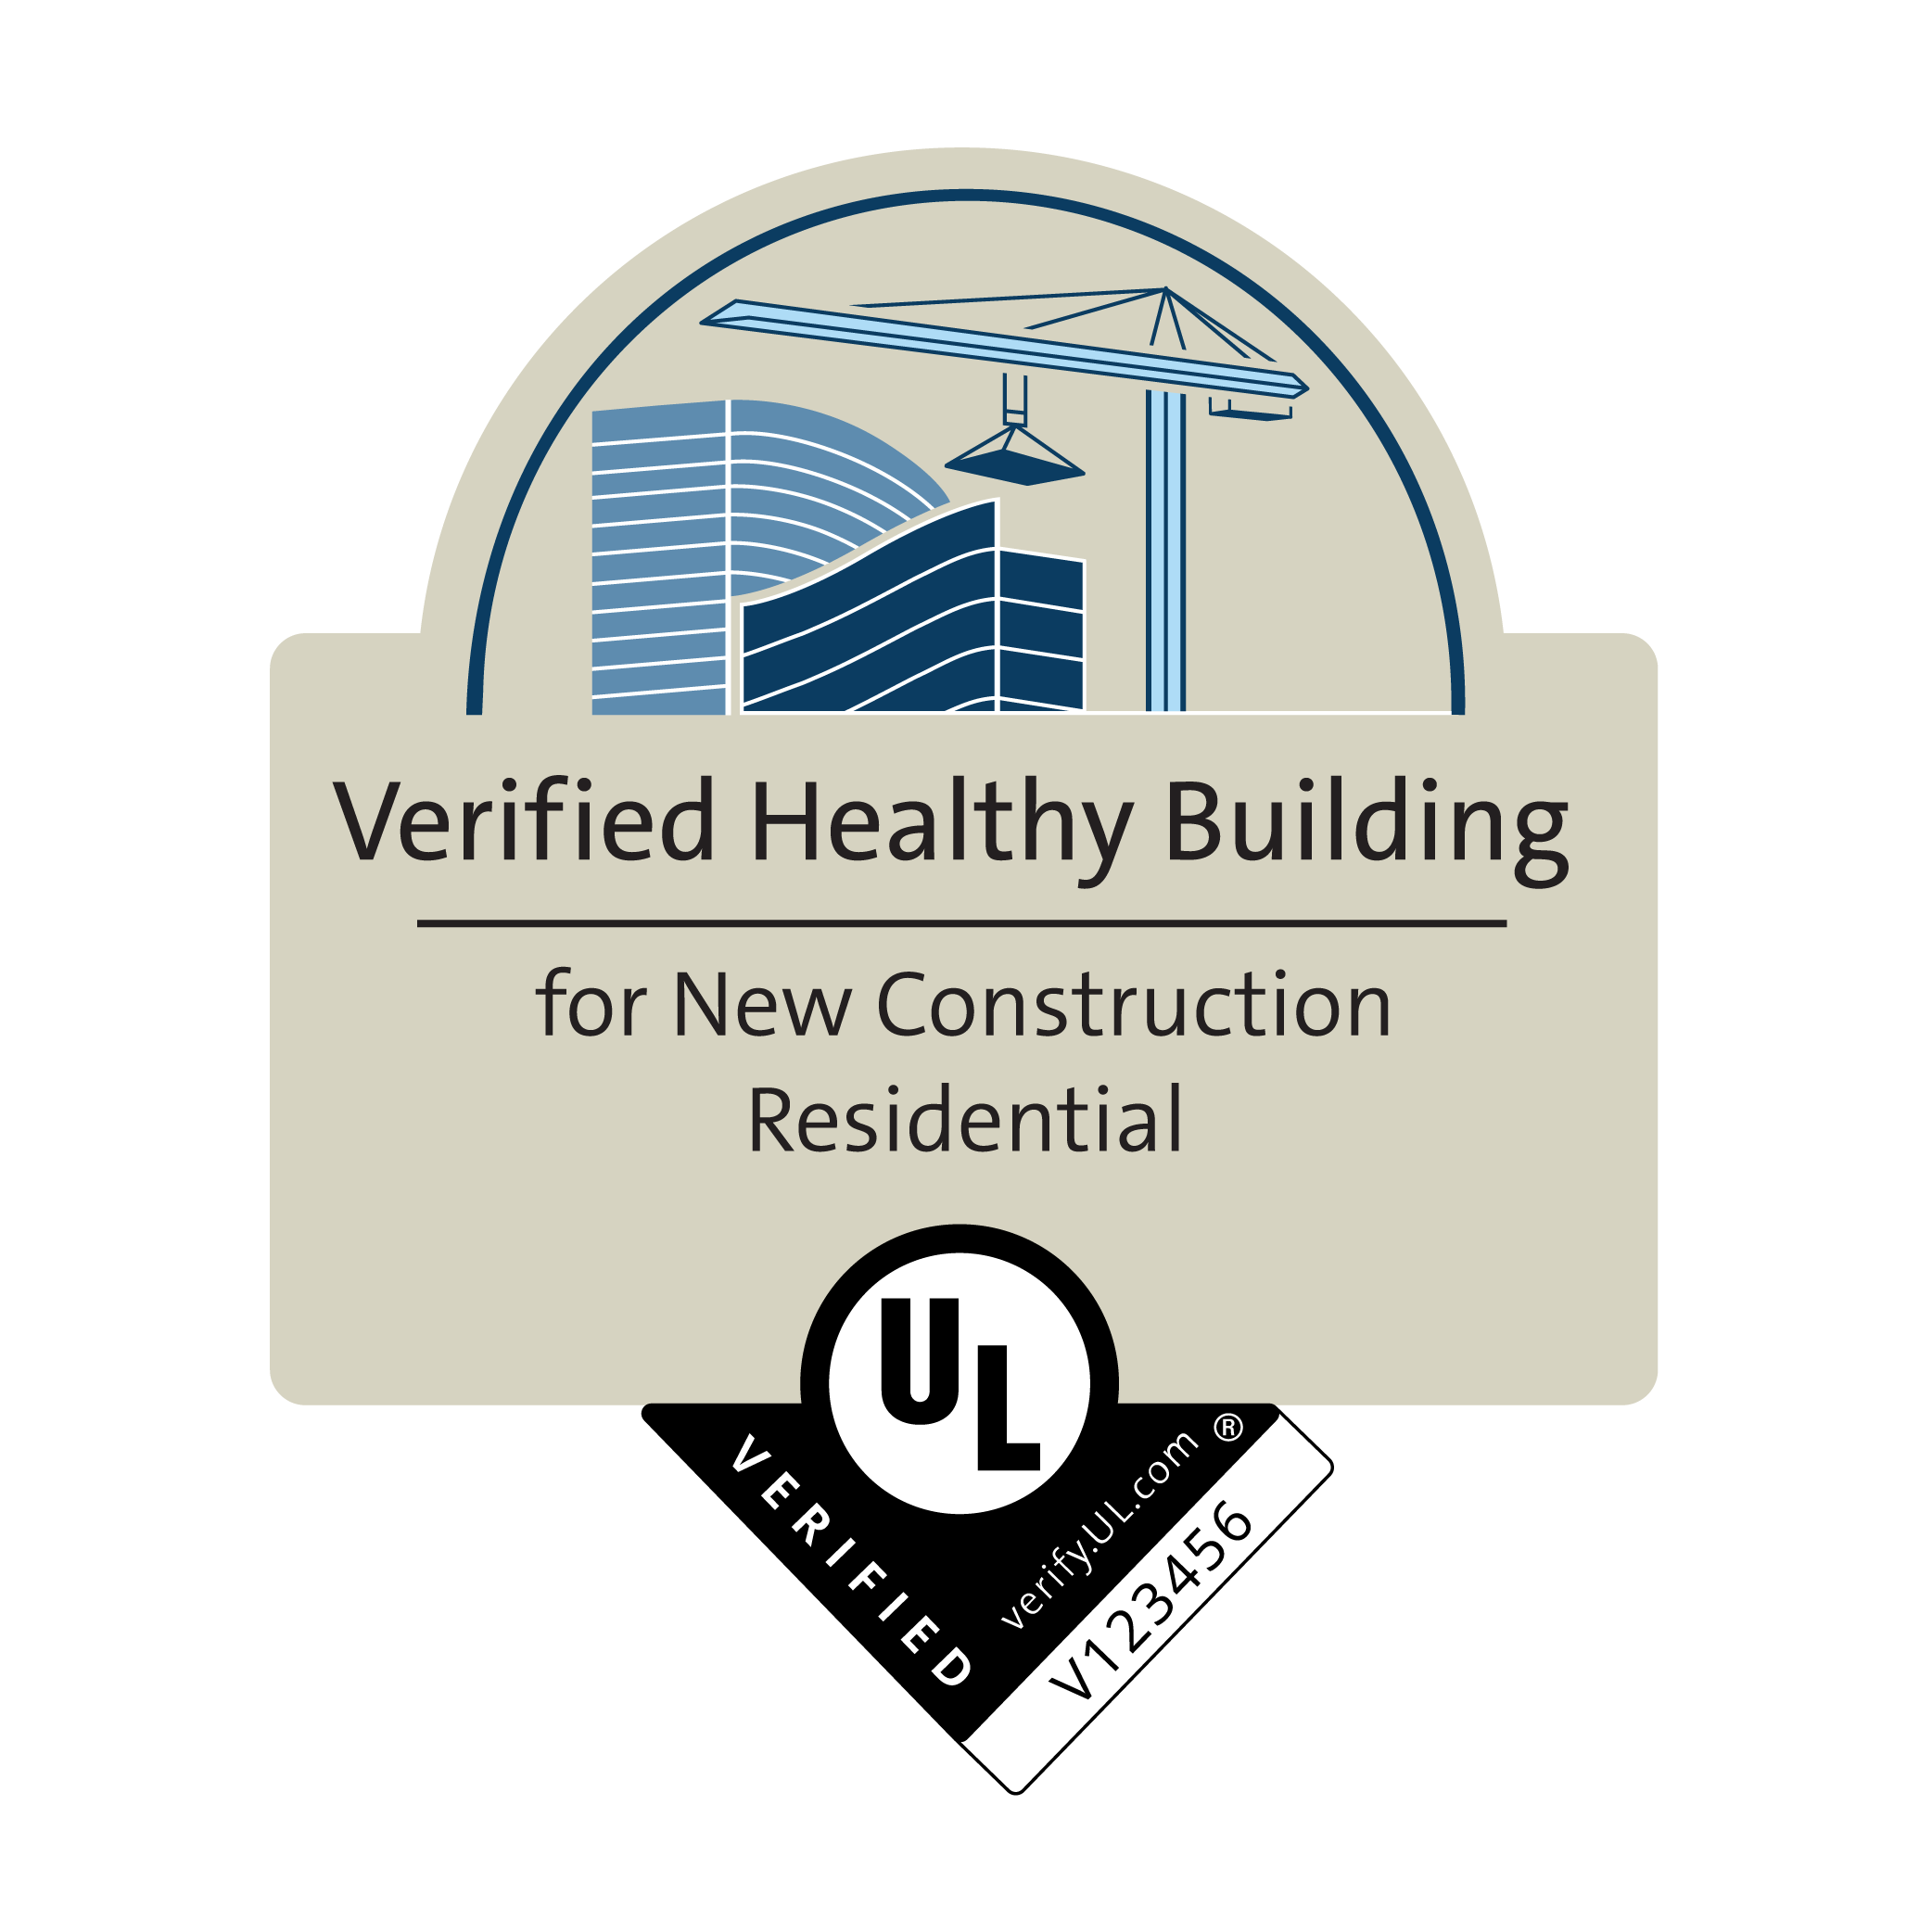 Verification Mark for Healthy Building for New Construction Residential